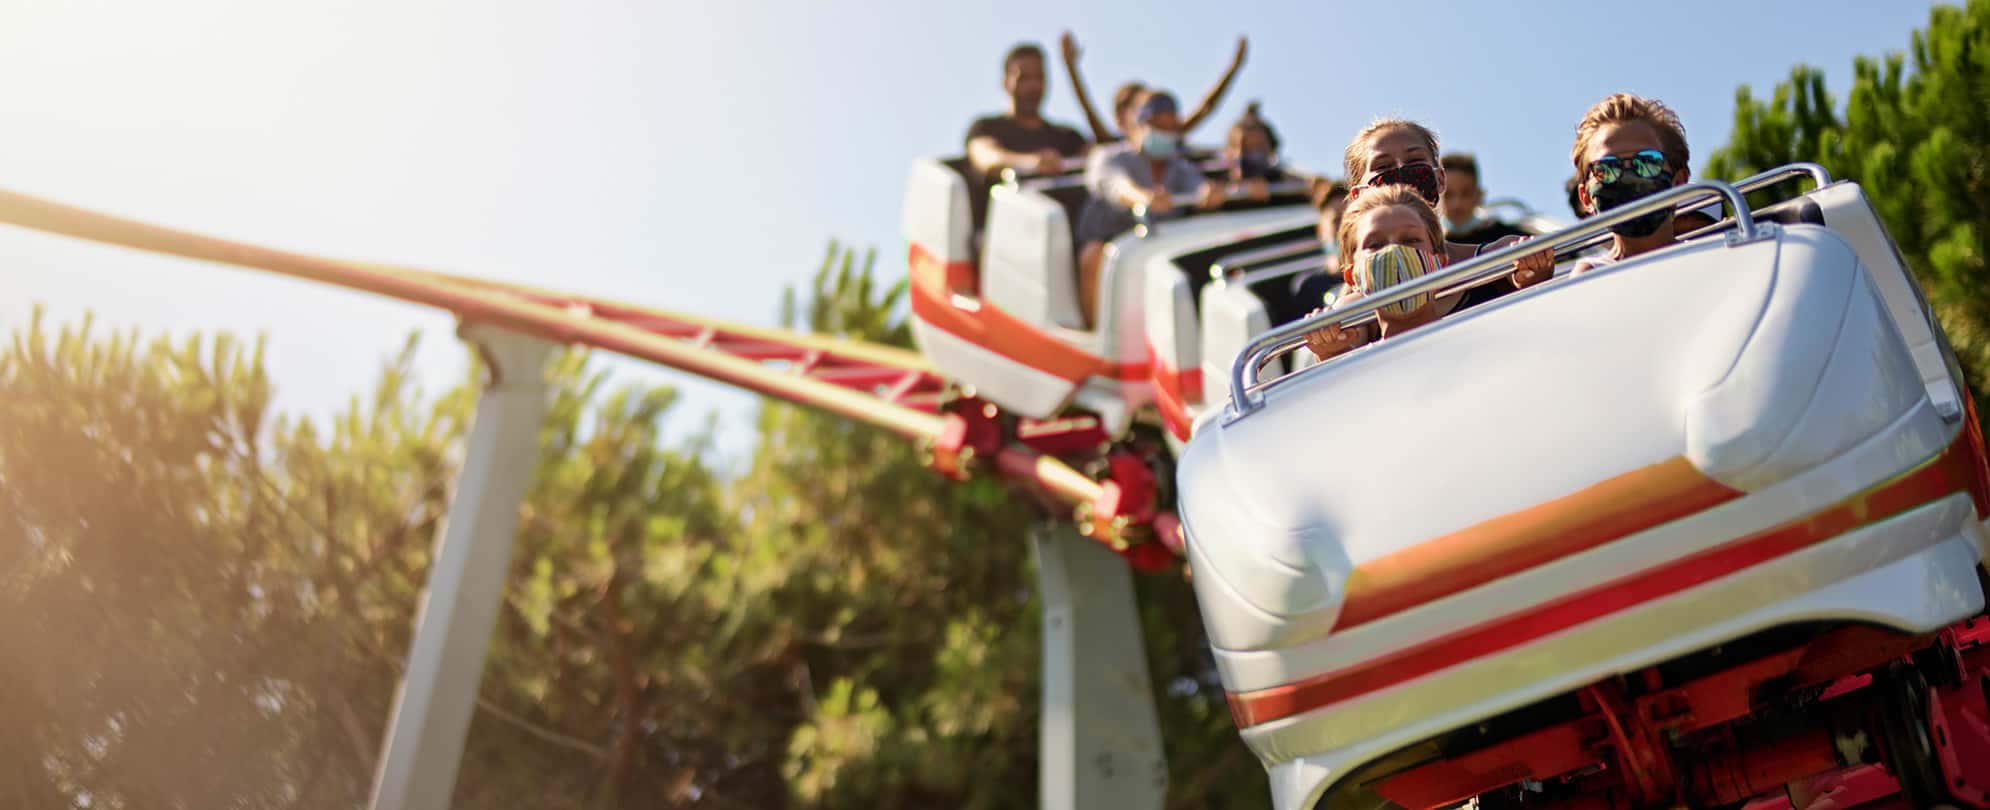 Three mask-wearing kids ride in the front car on a white and red roller coaster